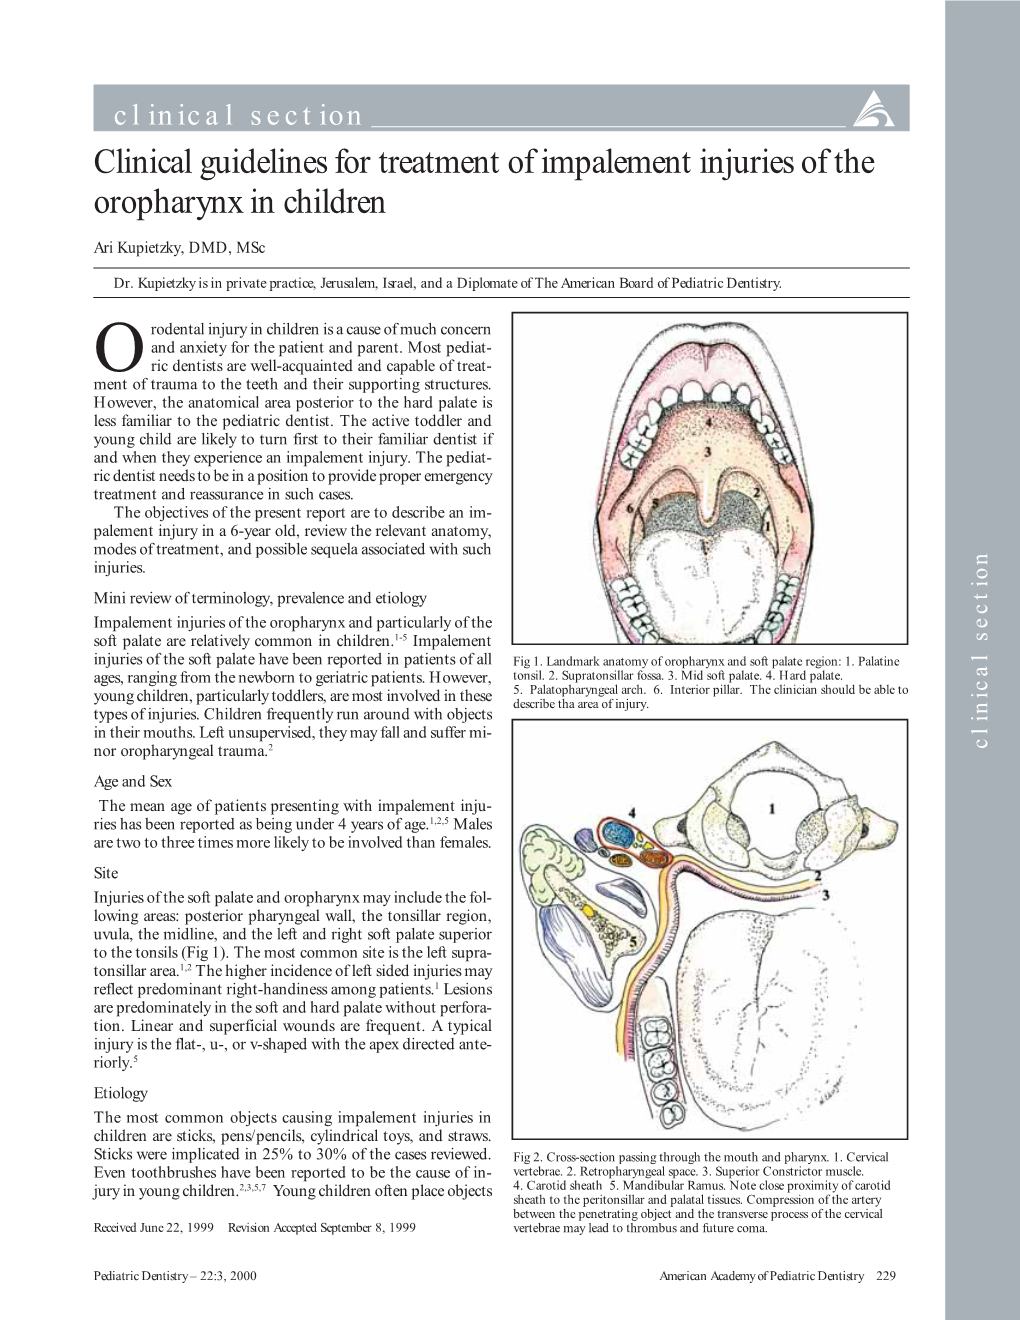 Clinical Guidelines for Treatment of Impalement Injuries of the Oropharynx in Children